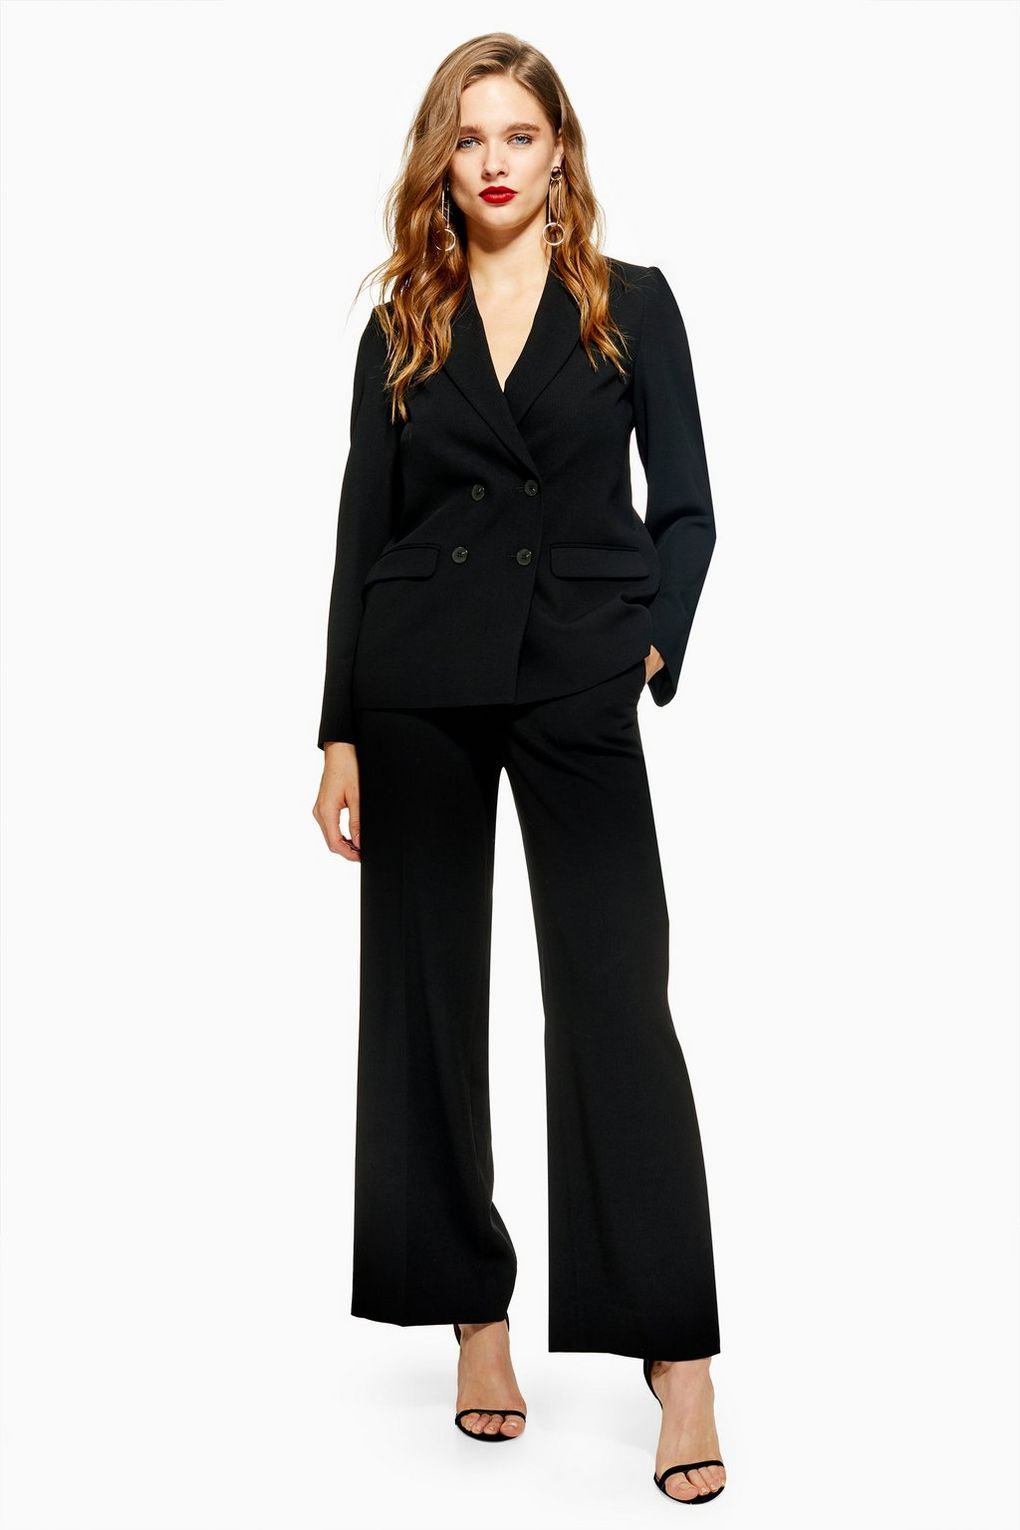 john lewis mother of the bride trouser suits